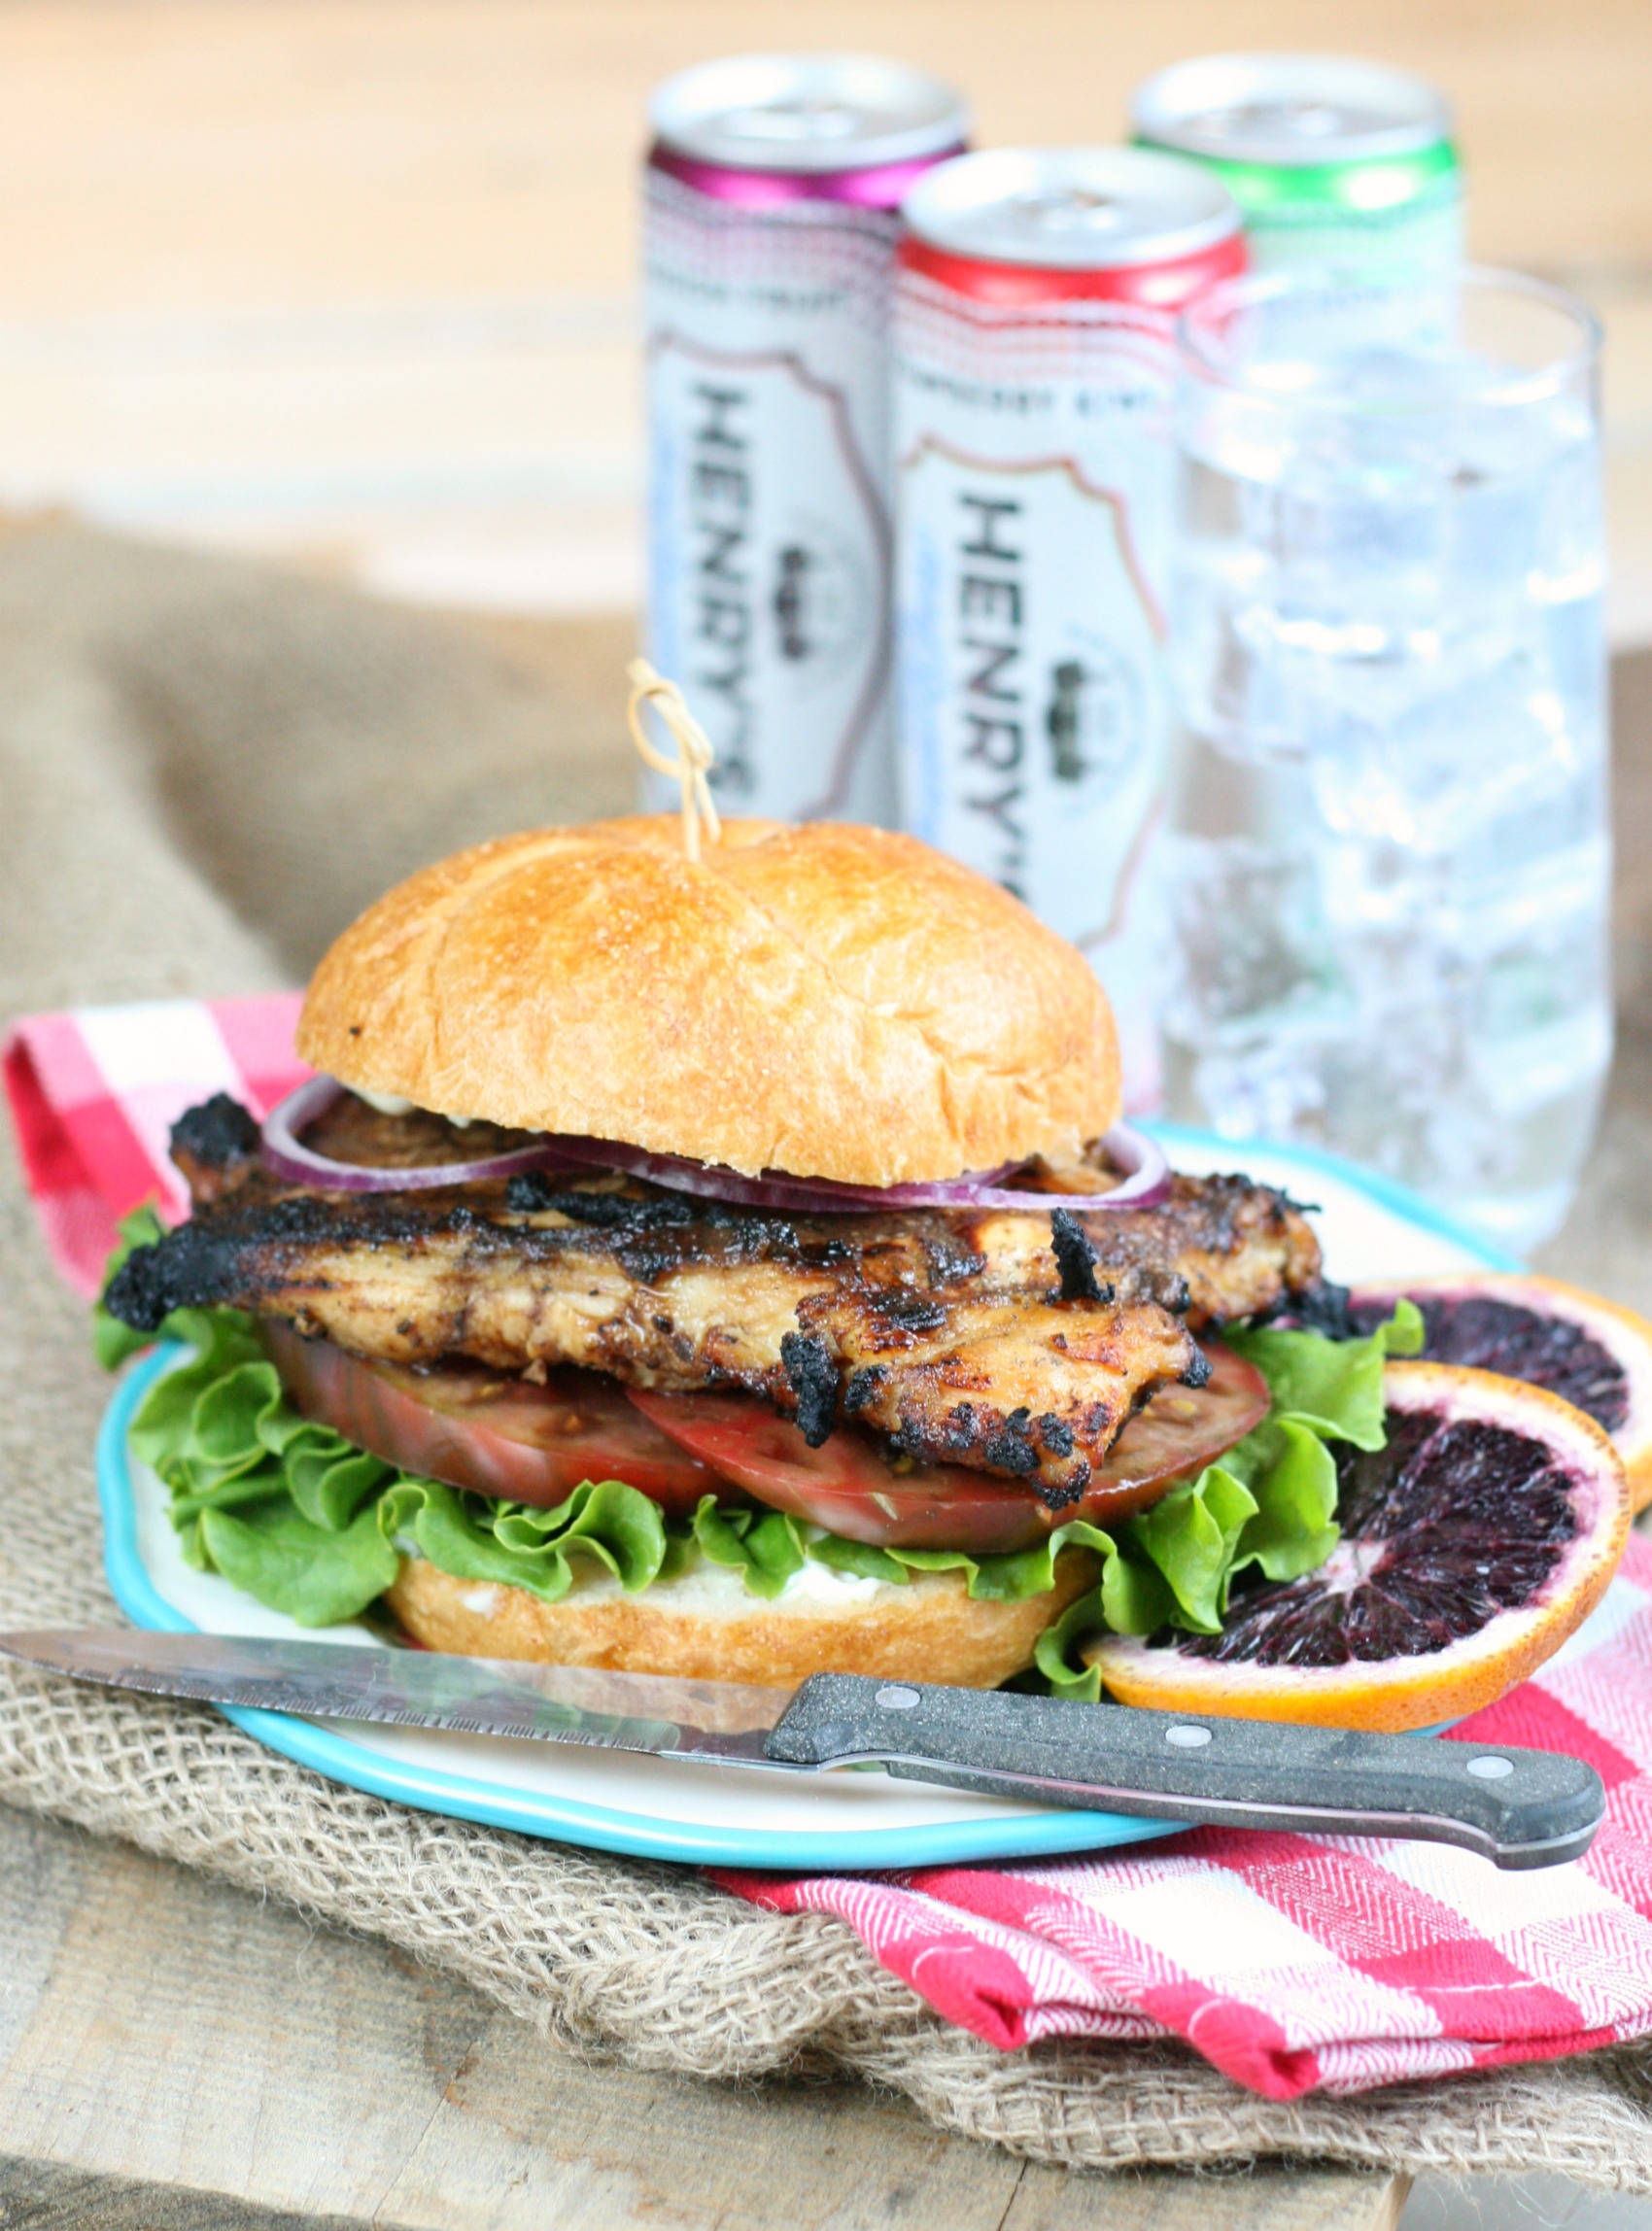 Grilled Chicken sitting on roll with tomatoes, lettuce, and thin slices of red onion, slices of blood oranges on the side of the plate.